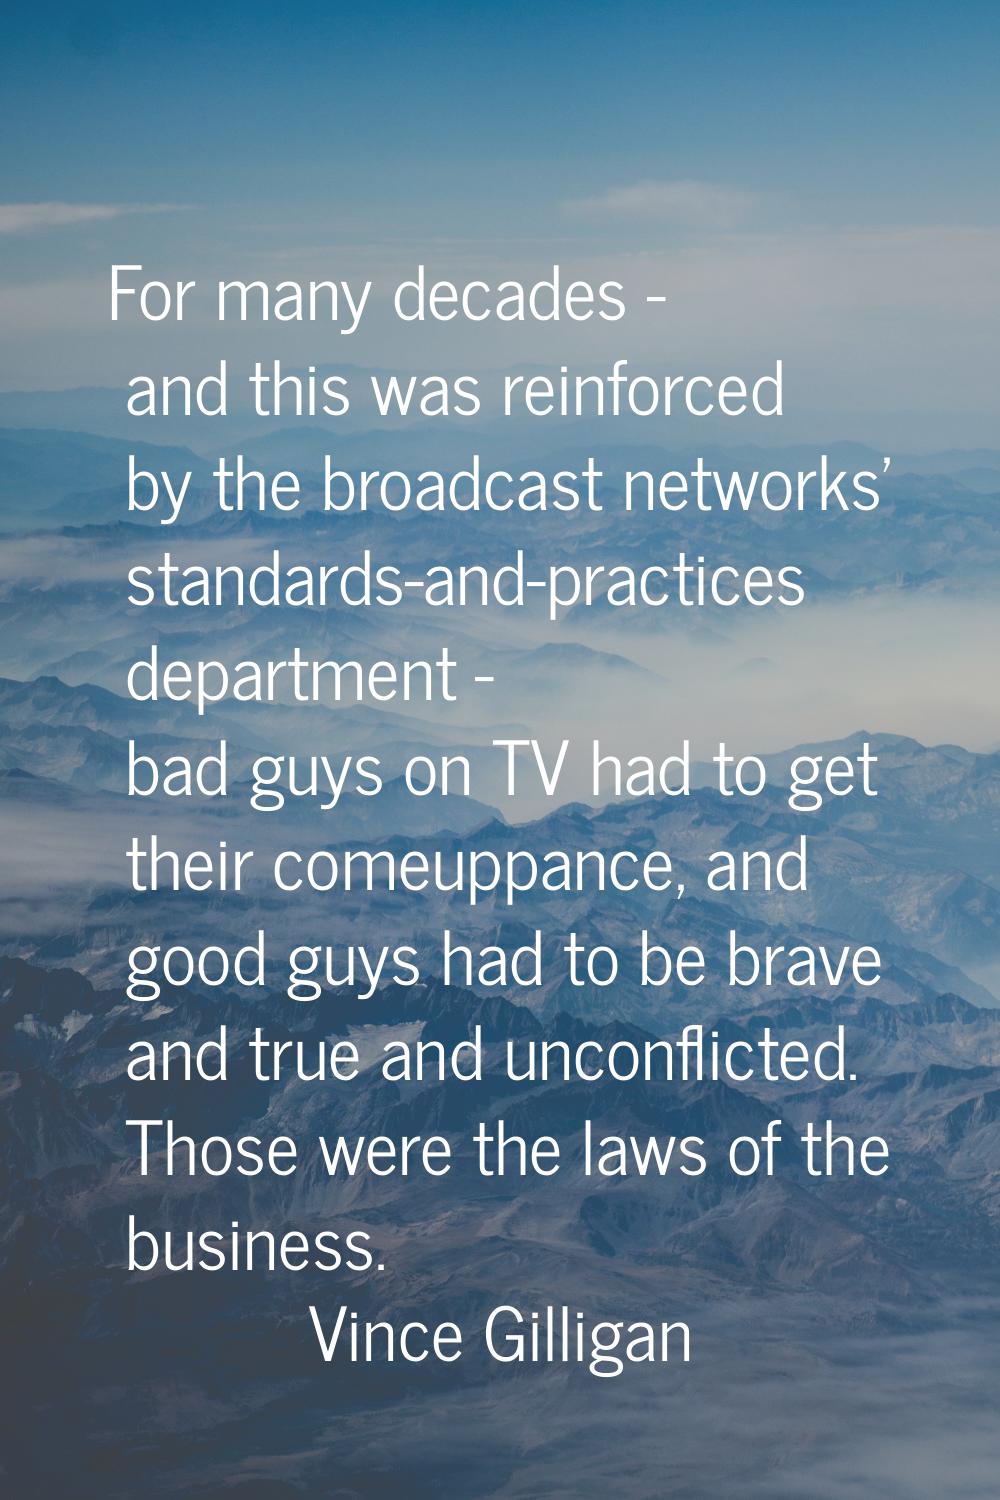 For many decades - and this was reinforced by the broadcast networks' standards-and-practices depar